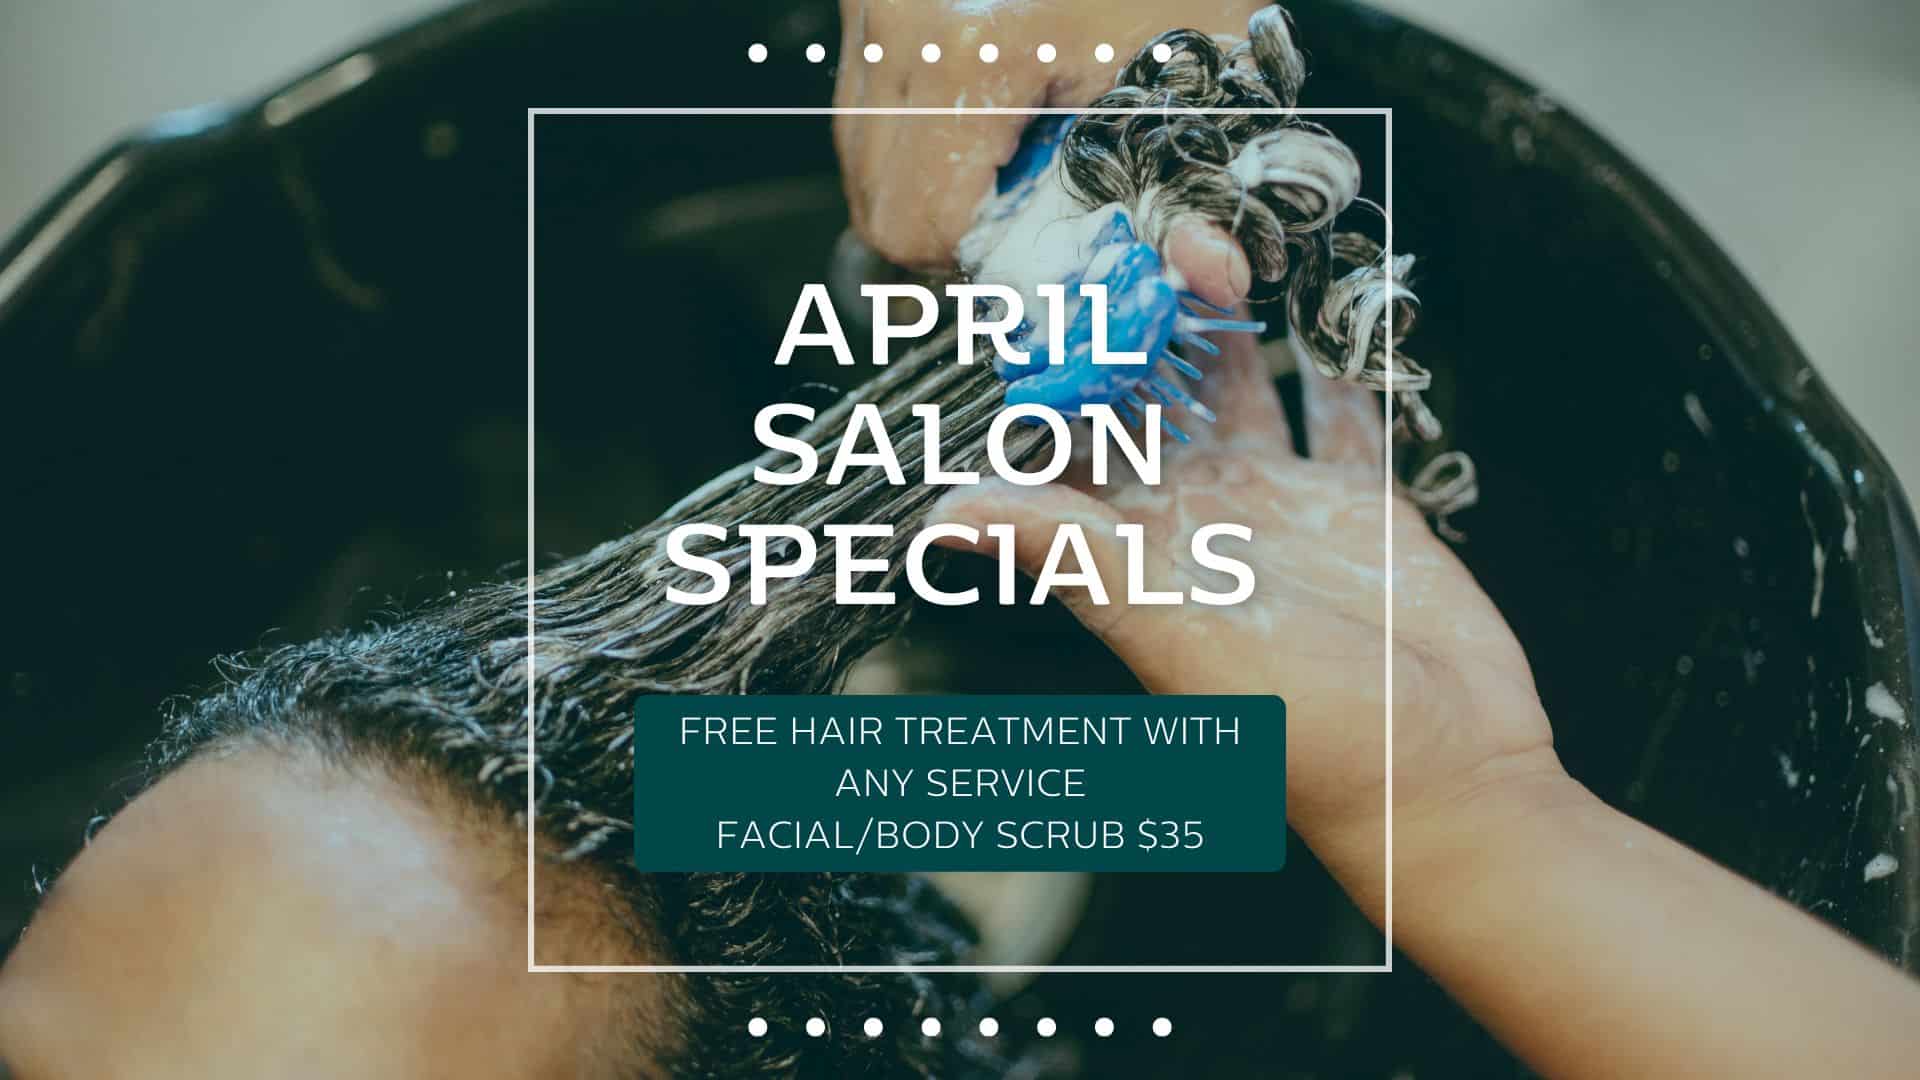 Featured image for https://www.cbbccareercollege.ca/upcoming-events/april-salon-specials-free-hair-treatment-with-any-service-and-facial-body-scrub-for-35/ event